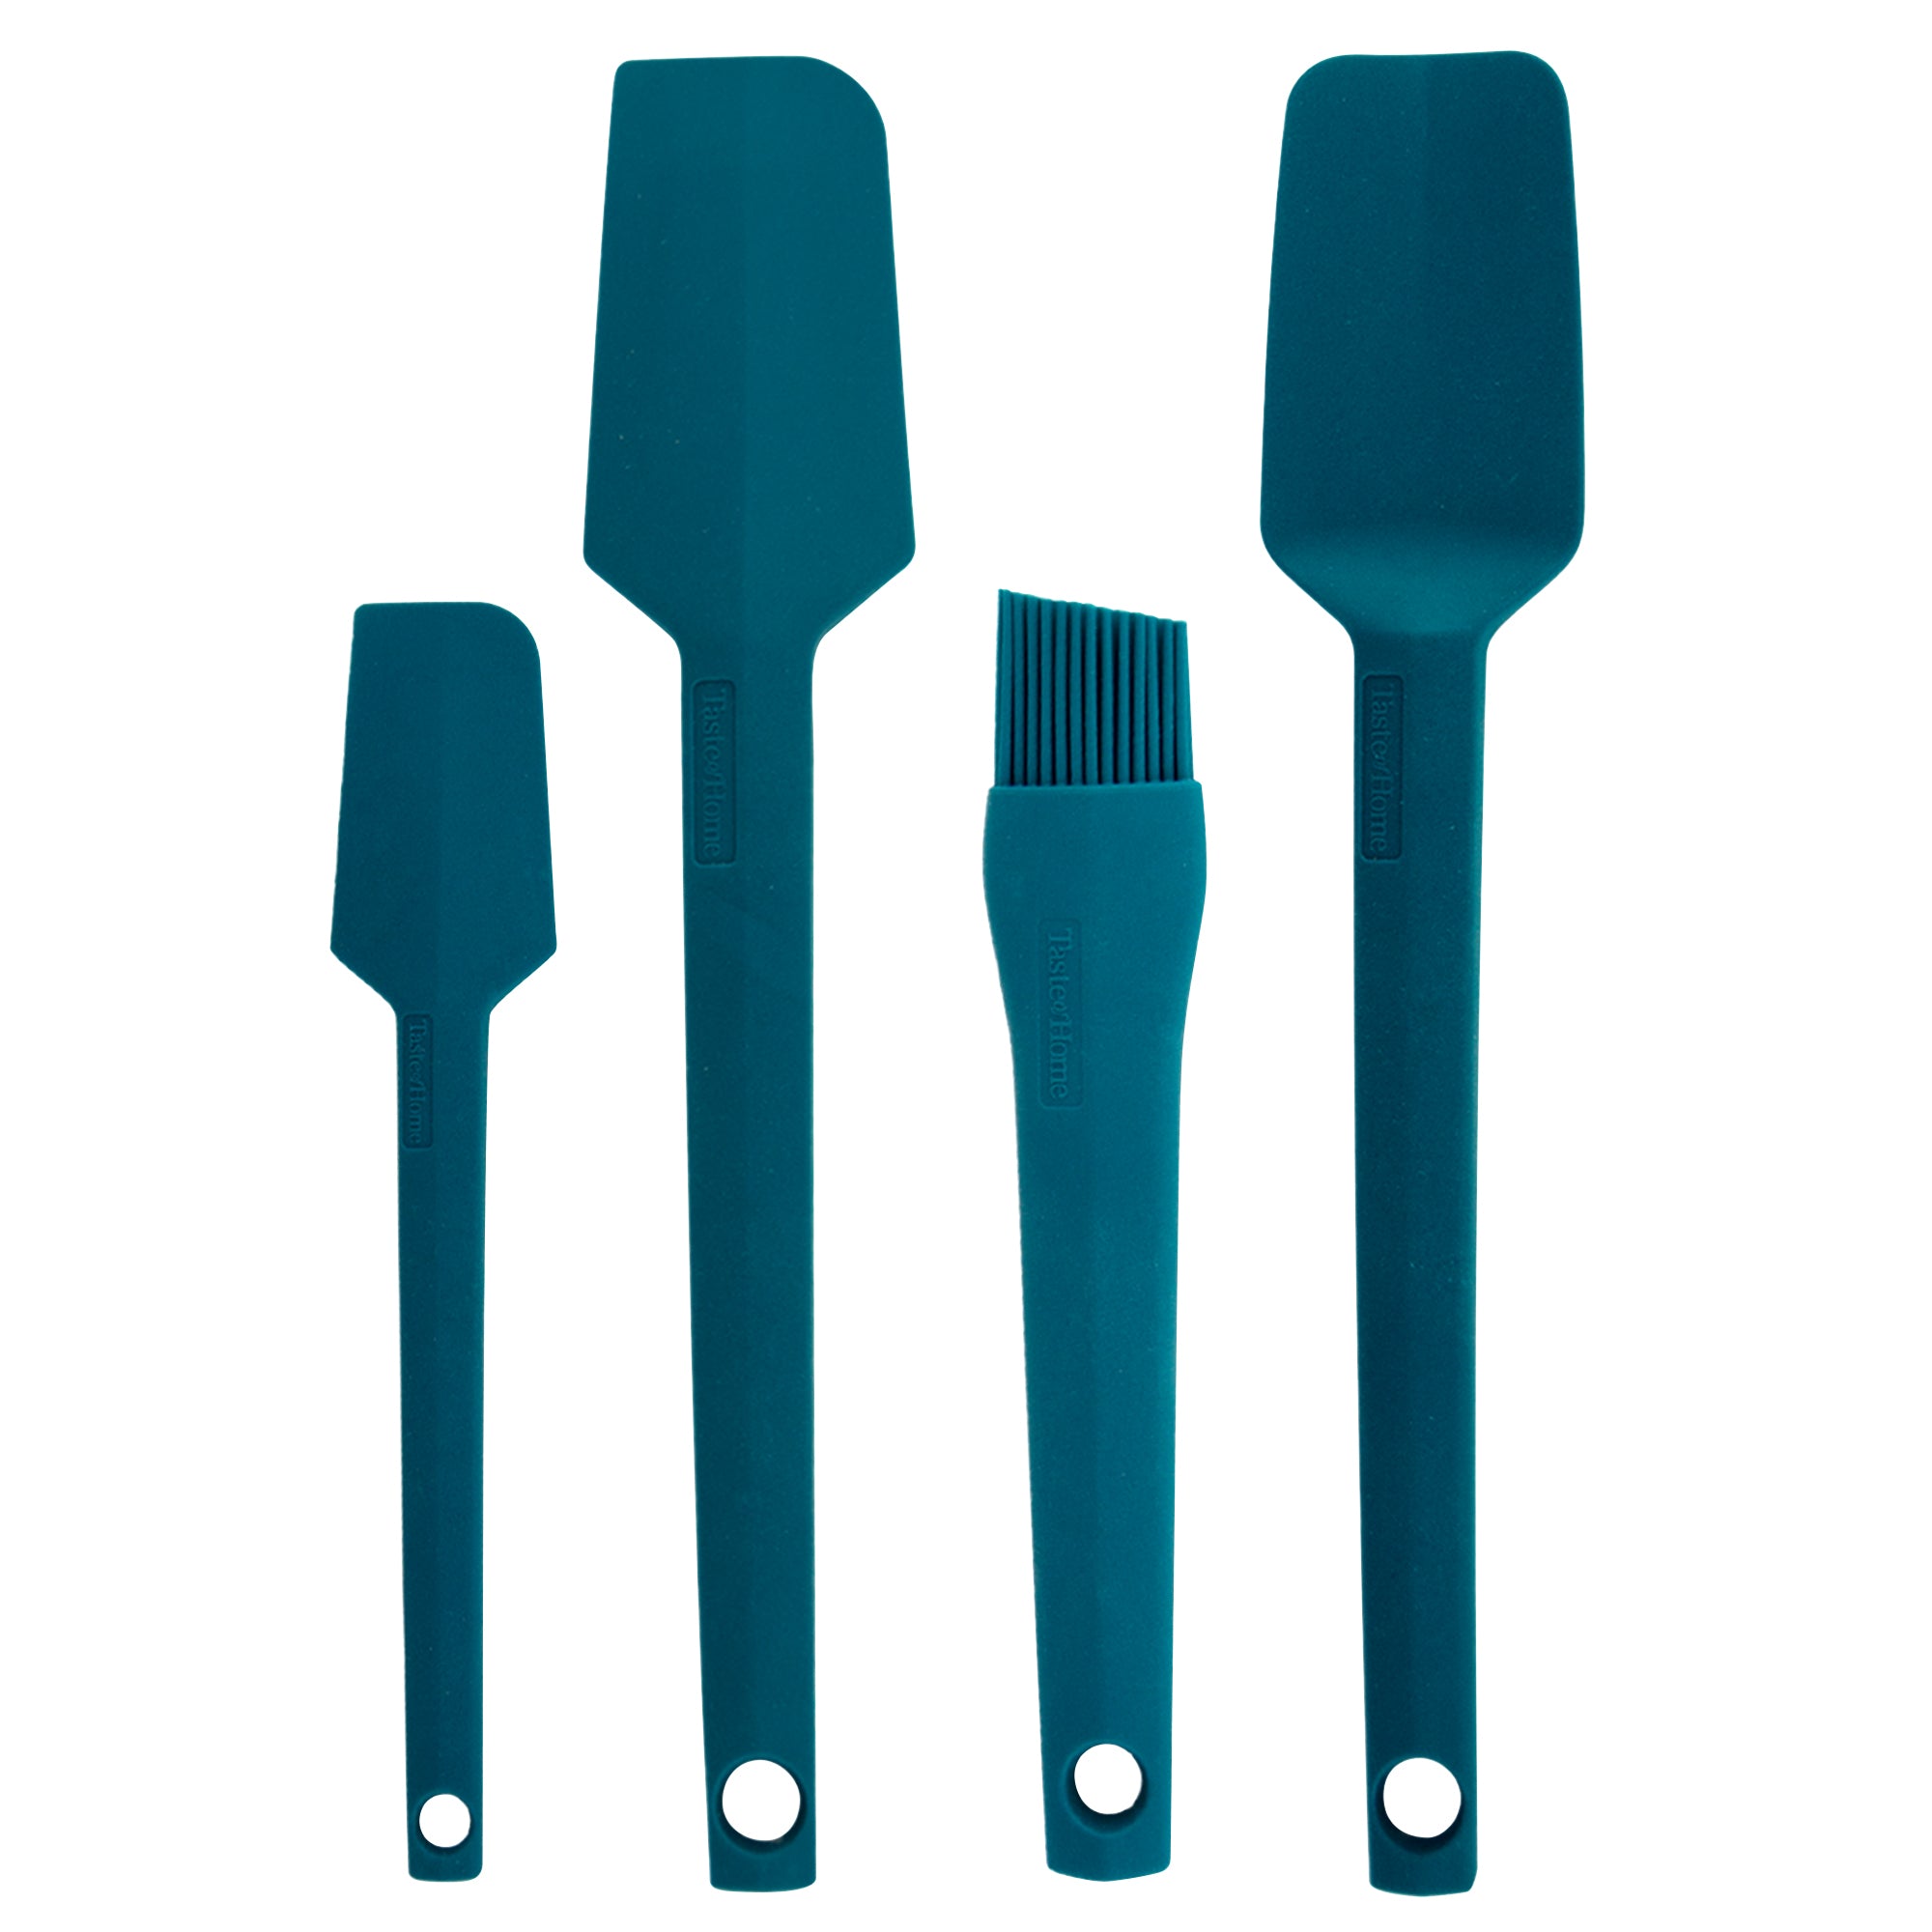 RangeKleen TG239A Large Silicone Whisk by Taste of Home